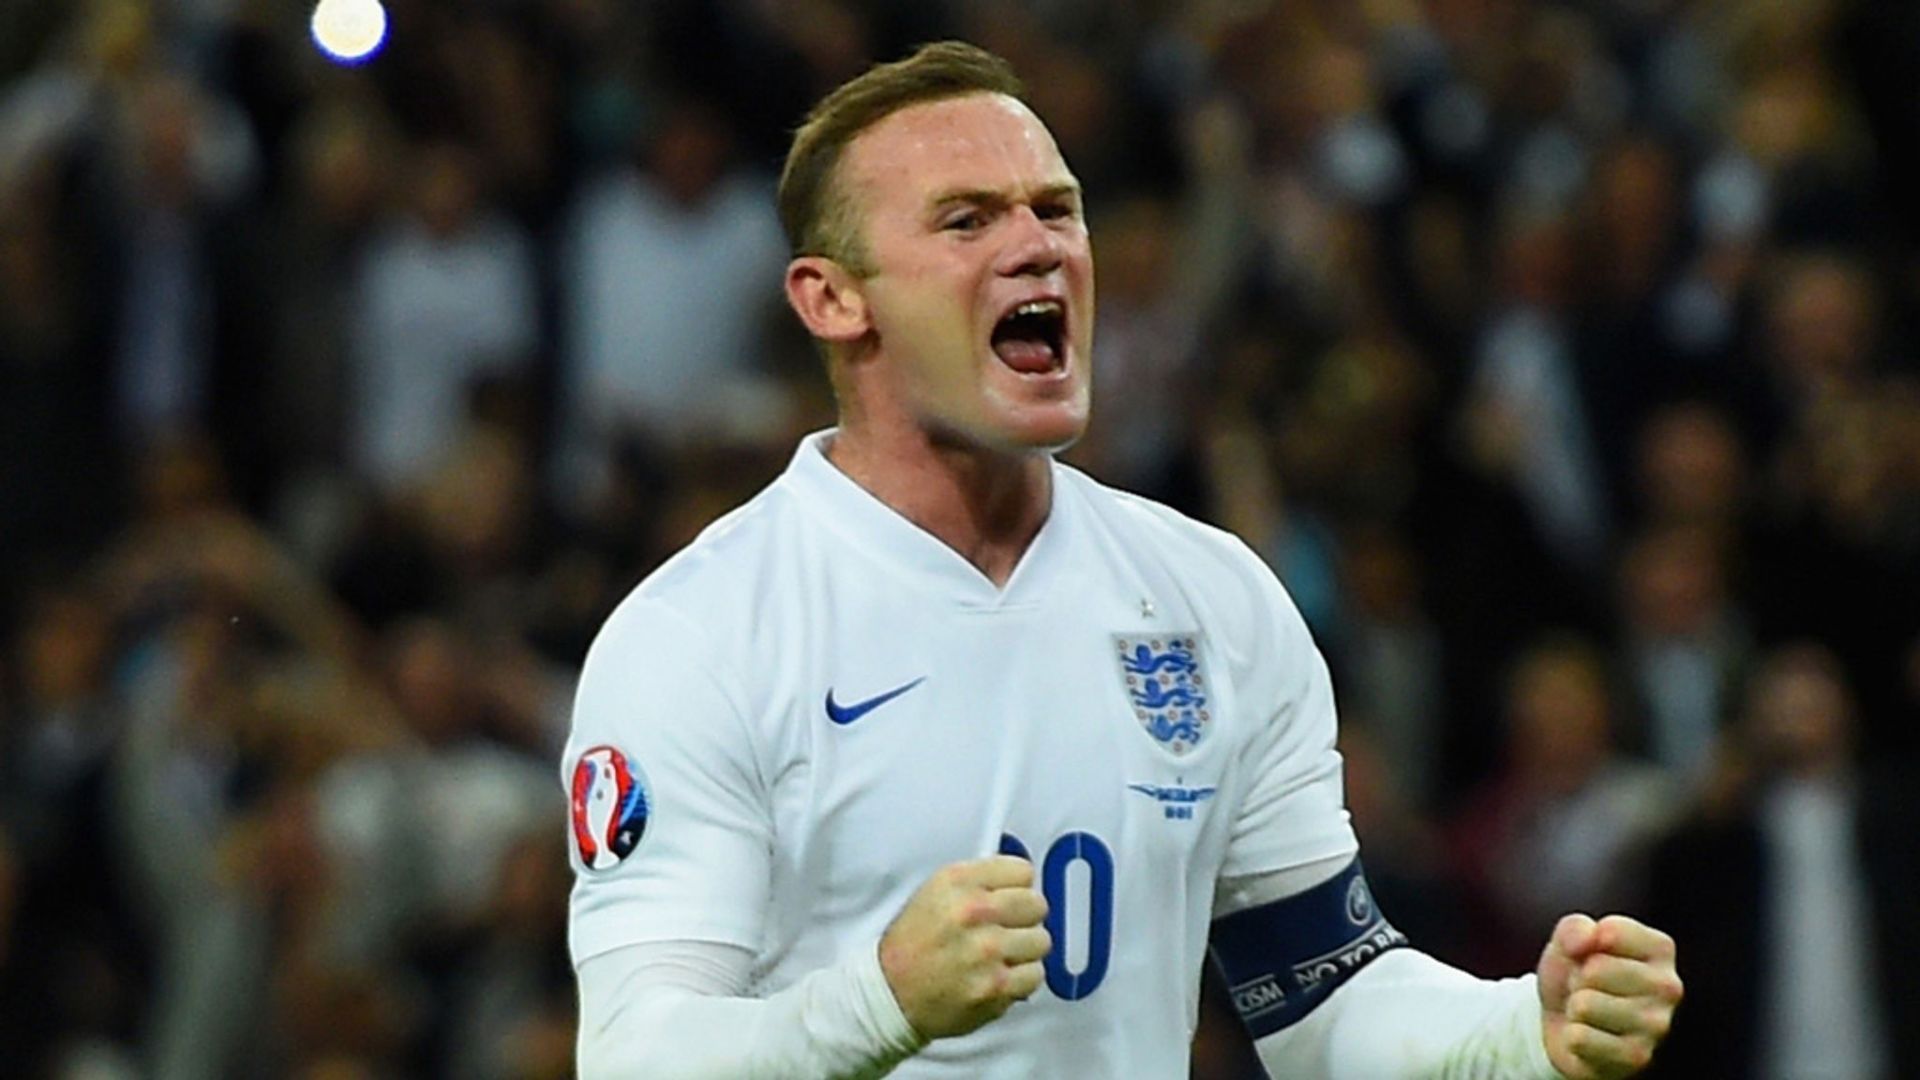 Wayne Rooney celebrating a goal for England in a game